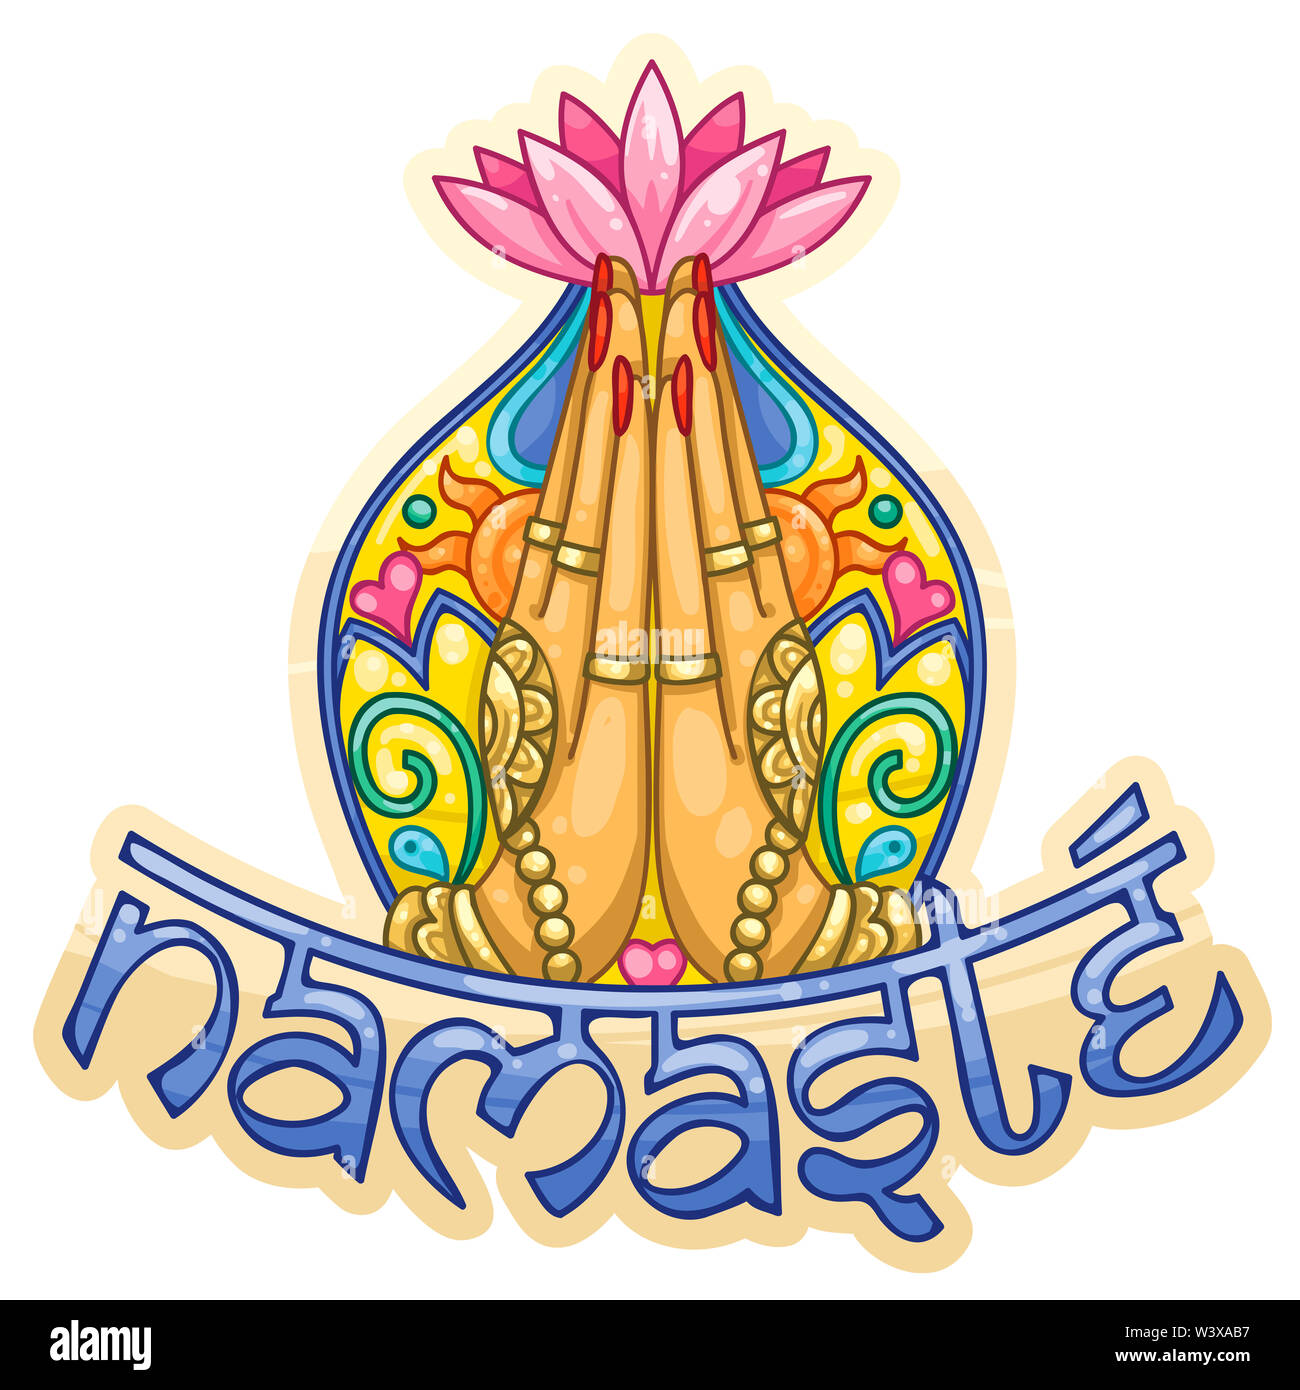 Namaste india Cut Out Stock Images & Pictures - Alamy